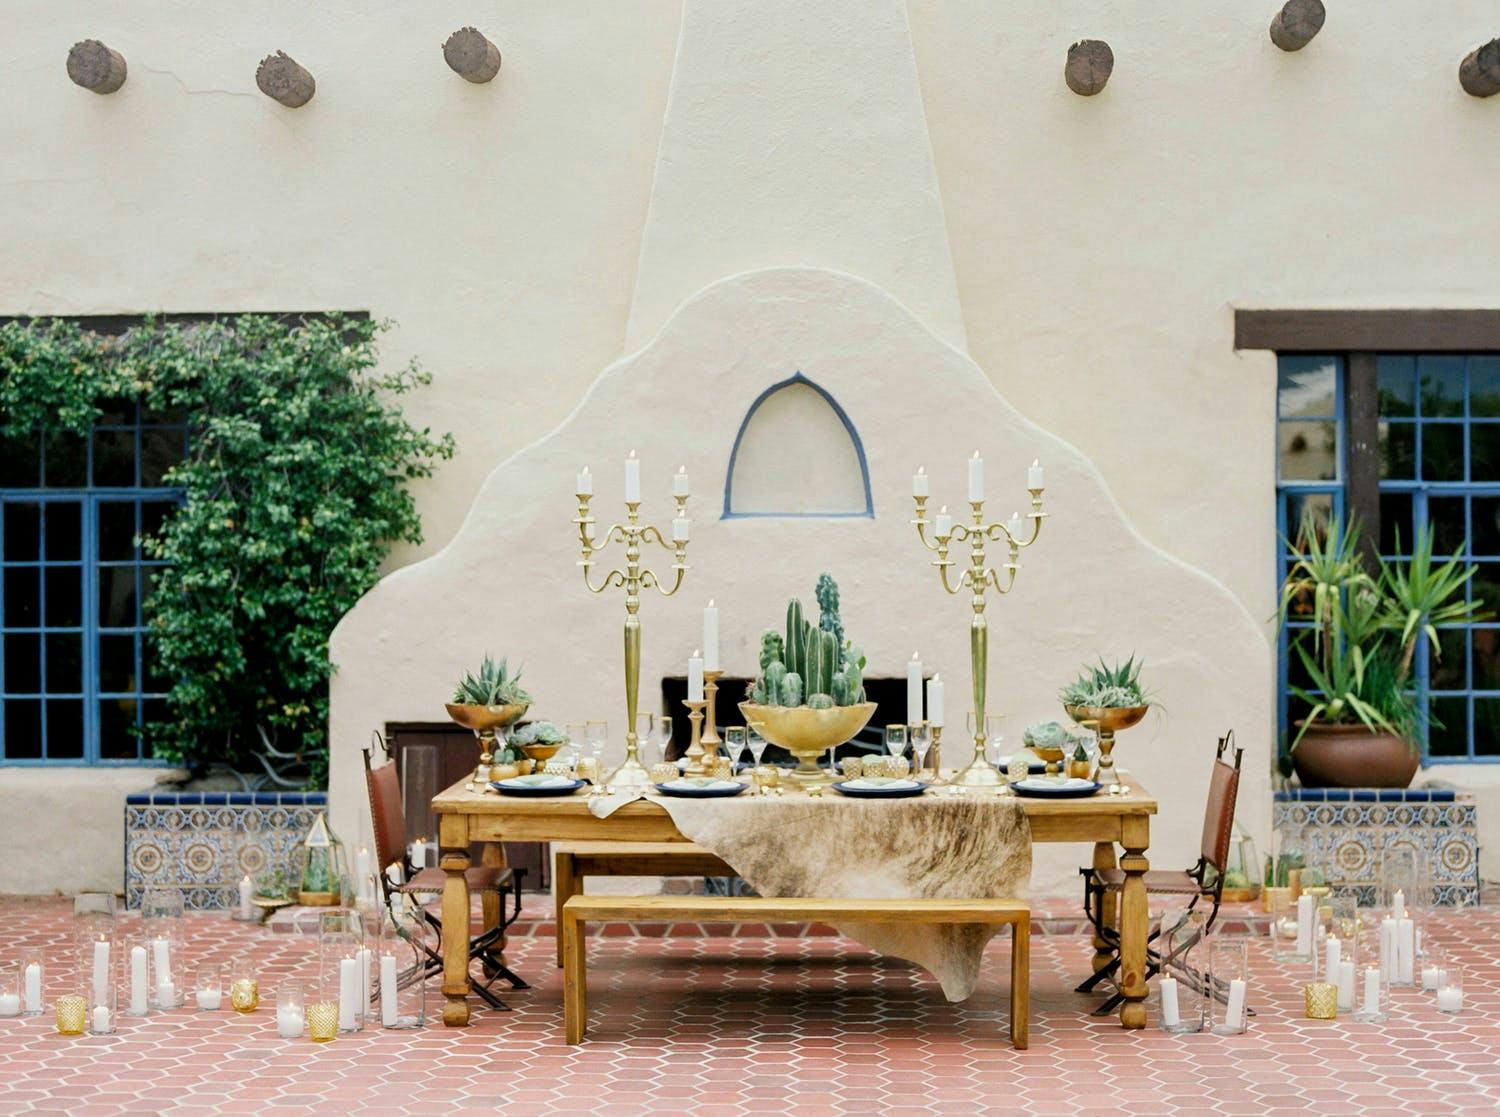 Dessert-Themed Wedding With Intimate Wedding Reception Table Laden Succulent Wedding Centerpieces and Golden Candelabras | PartySlate